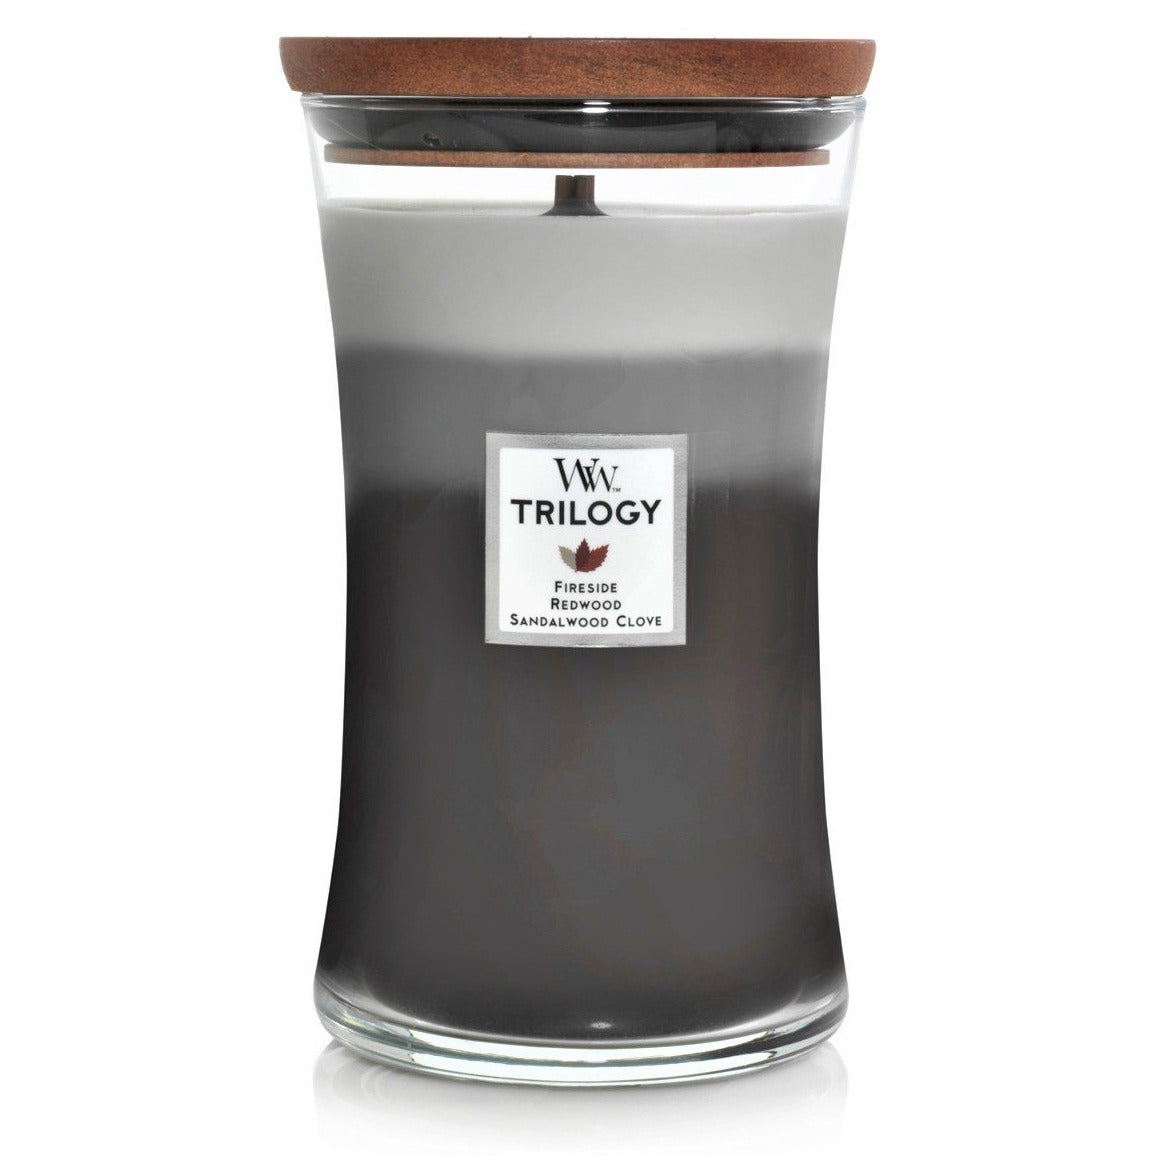 WOODWICK CANDLE - WARM WOODS TRILOGY